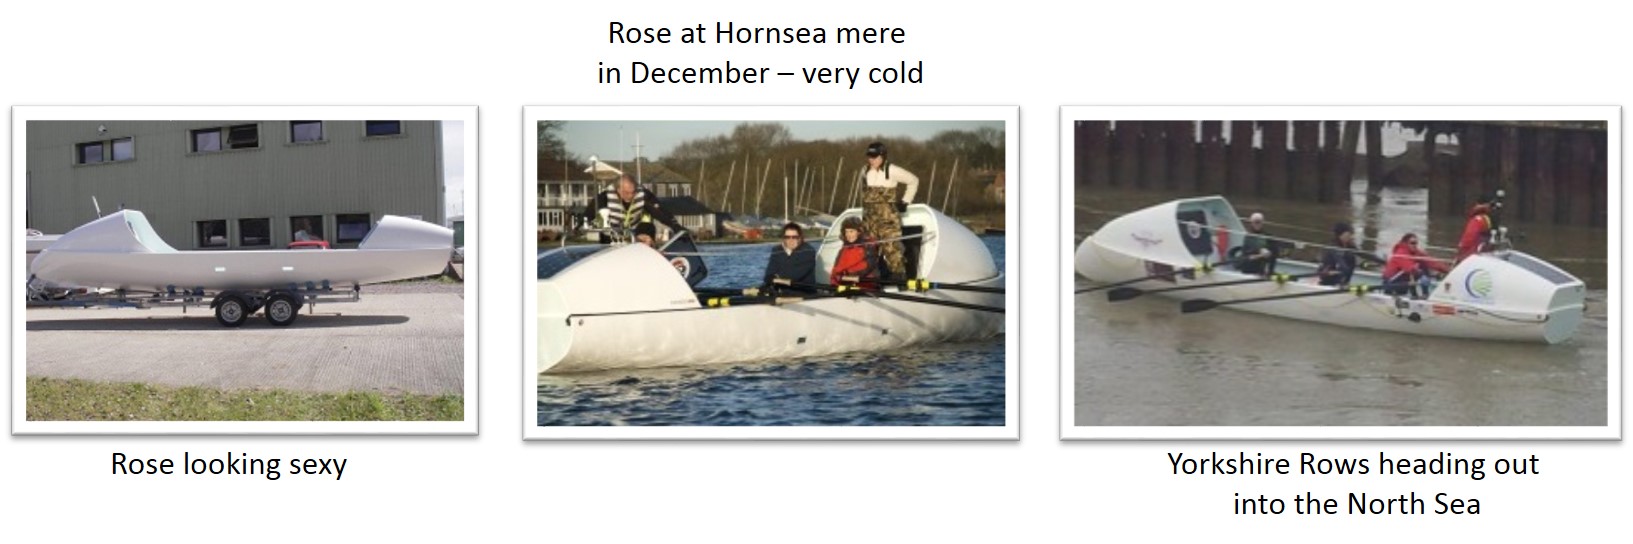 Yorkshire Rows